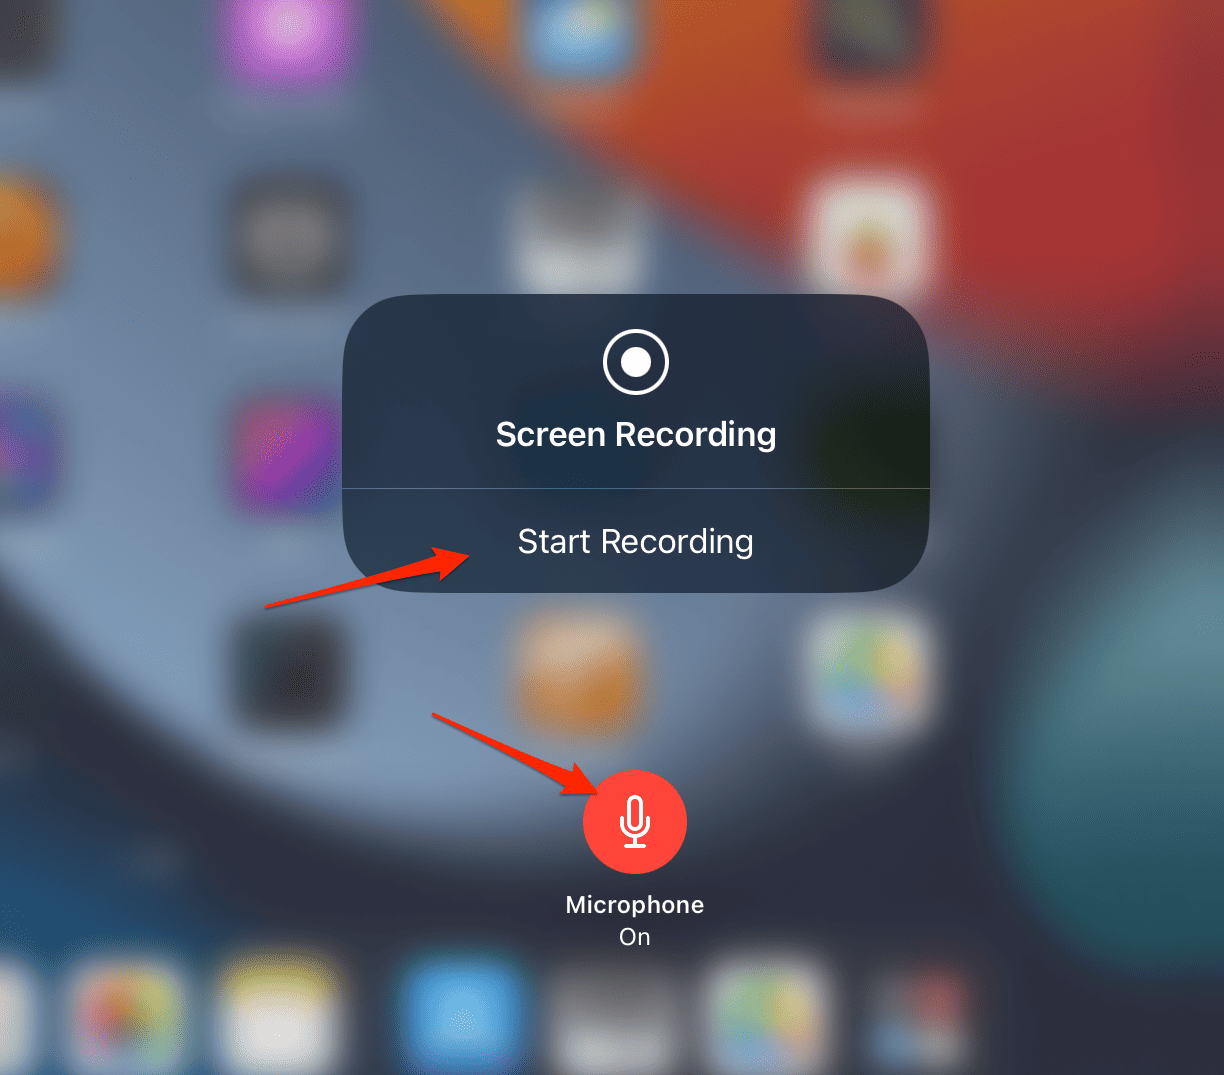 microphone_start_recording how to record with sound on ipad